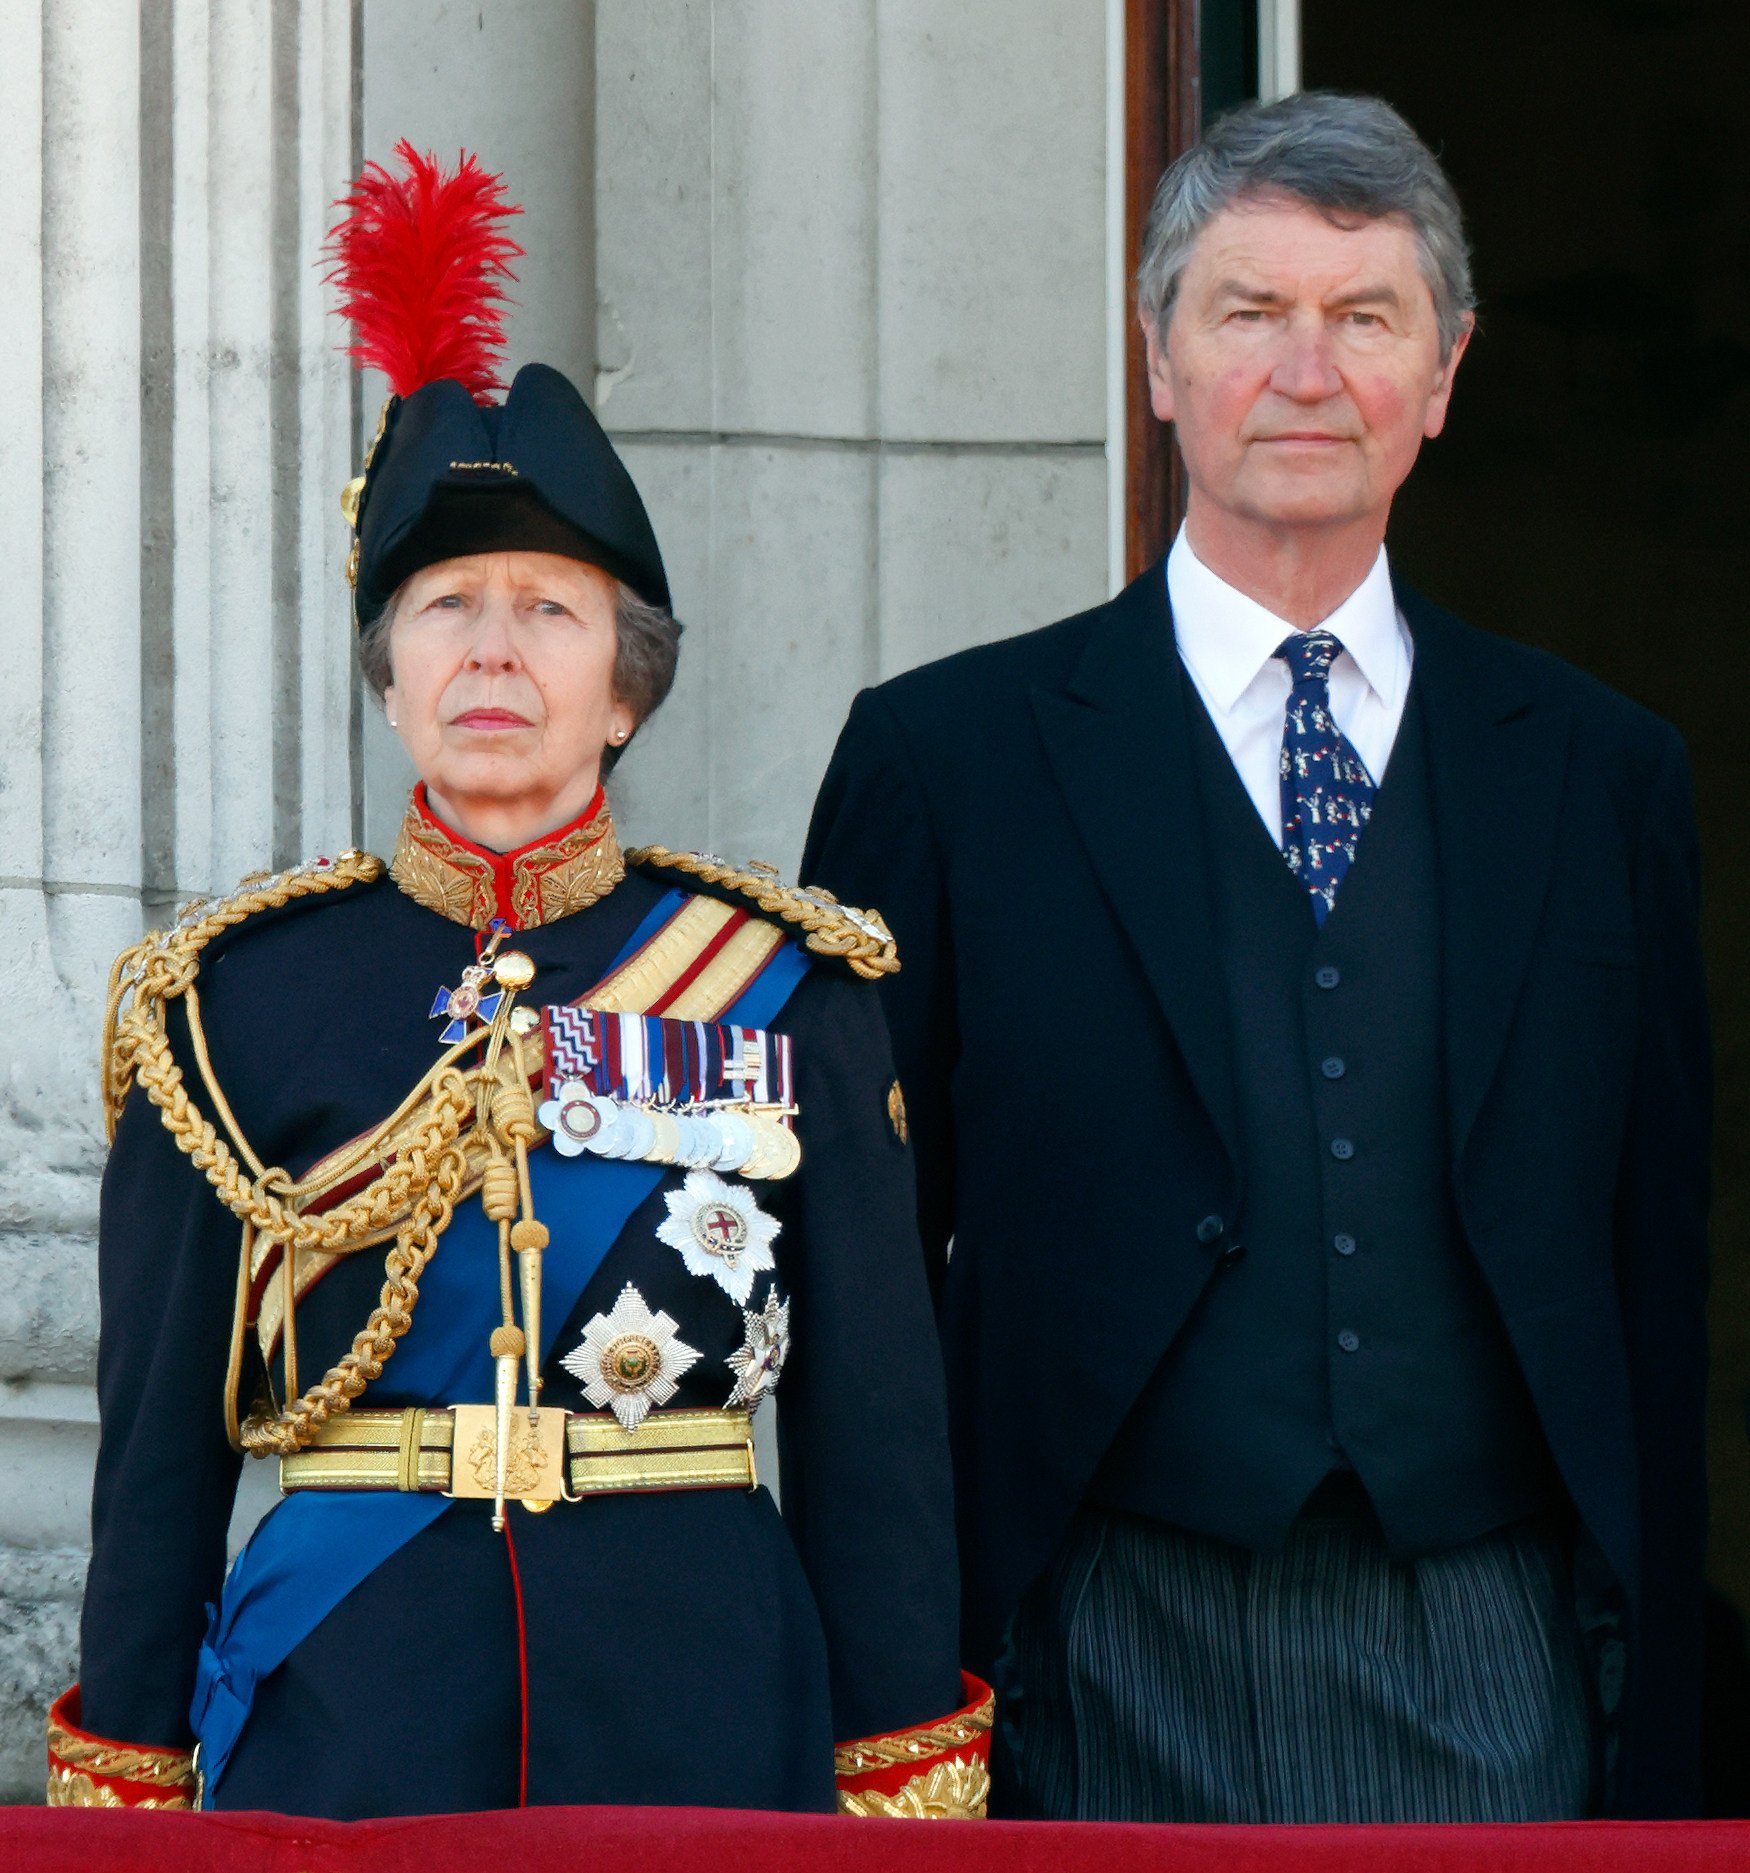 Princess Anne and Vice Admiral Sir Timothy Laurence have now been married for 32 years after their relationship got off to a clandestine start. Photo: Indigo/Getty Images